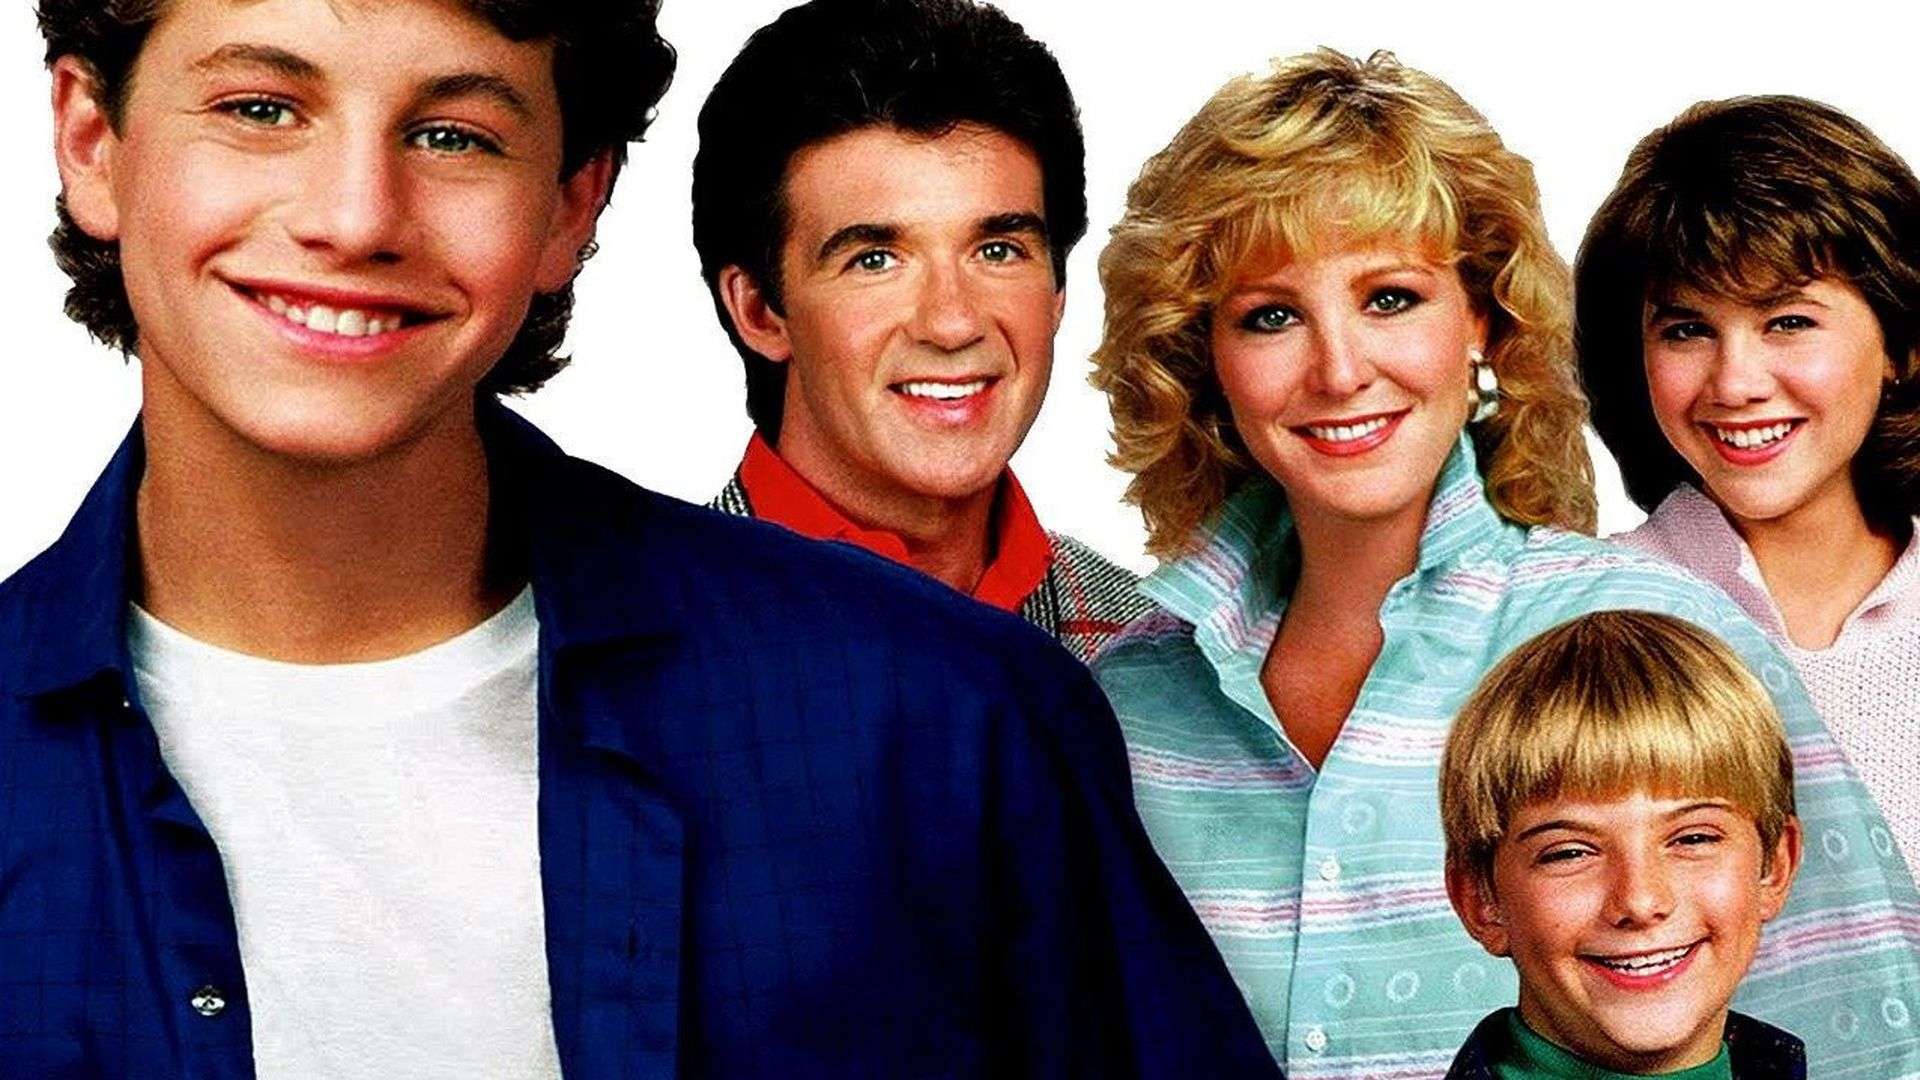 The Growing Pains TV fan quiz